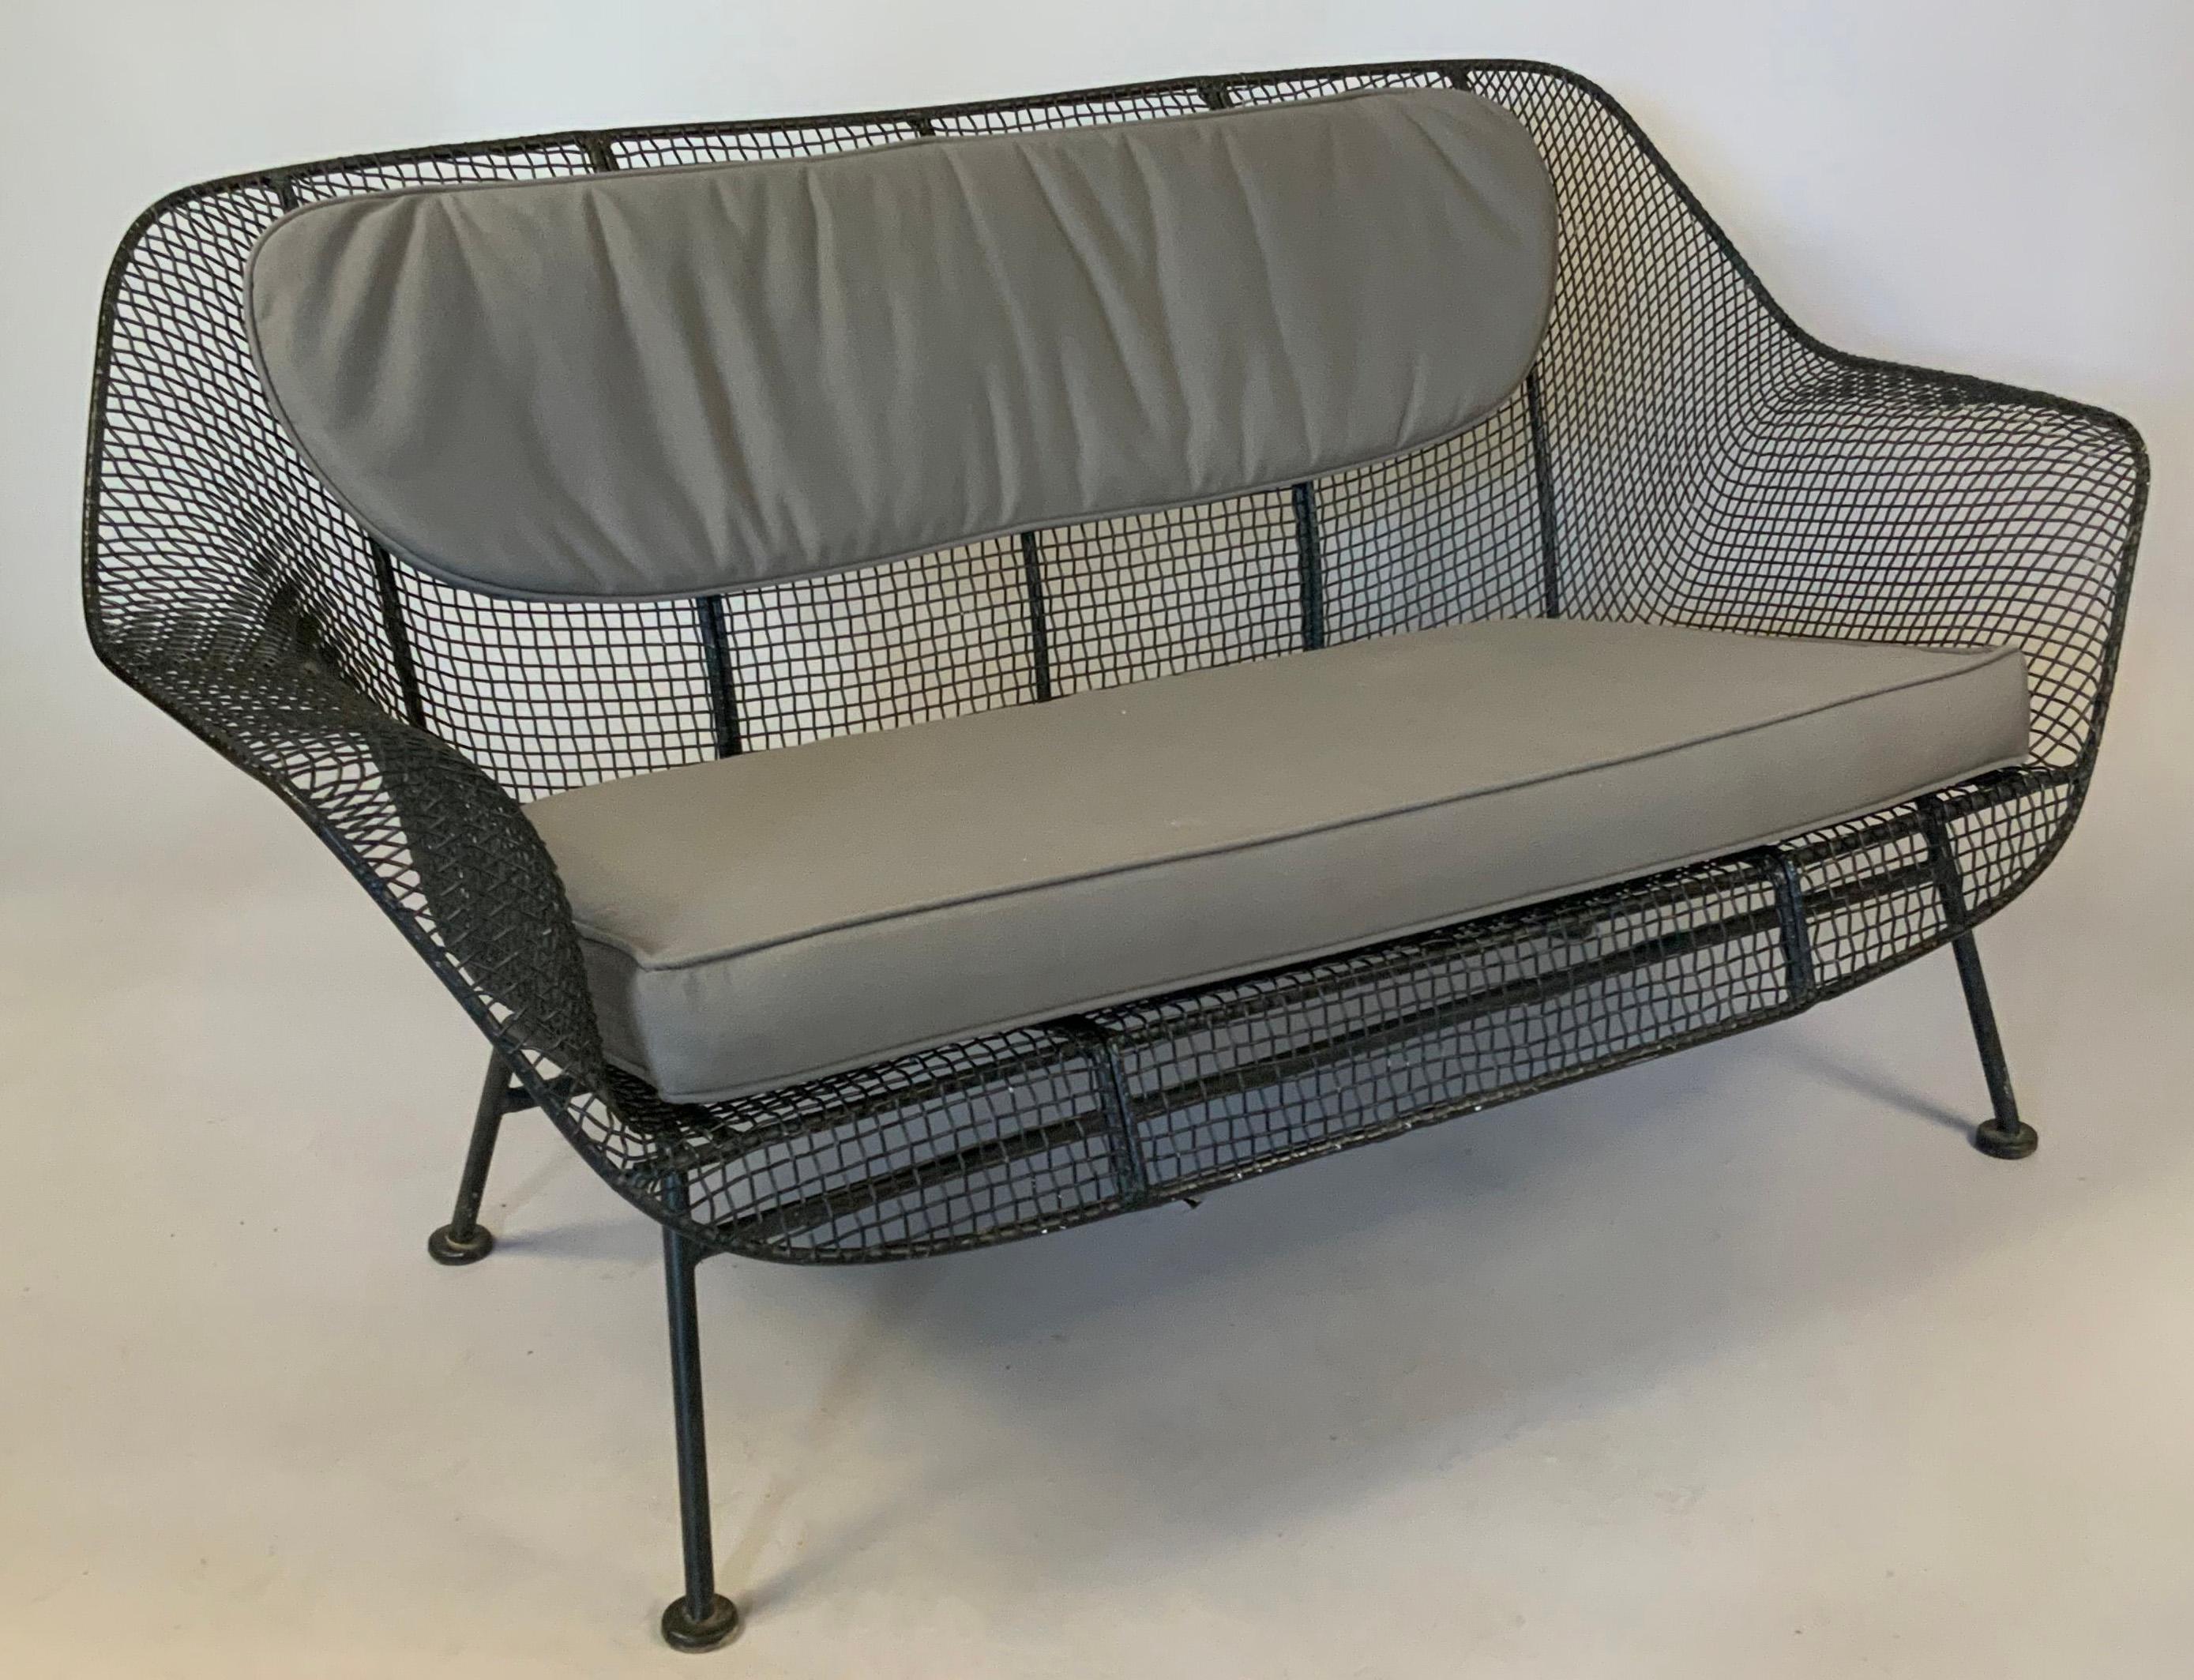 Vintage 1950s 'Sculptura' Wrought Iron Settee by Russell Woodard In Good Condition For Sale In Hudson, NY